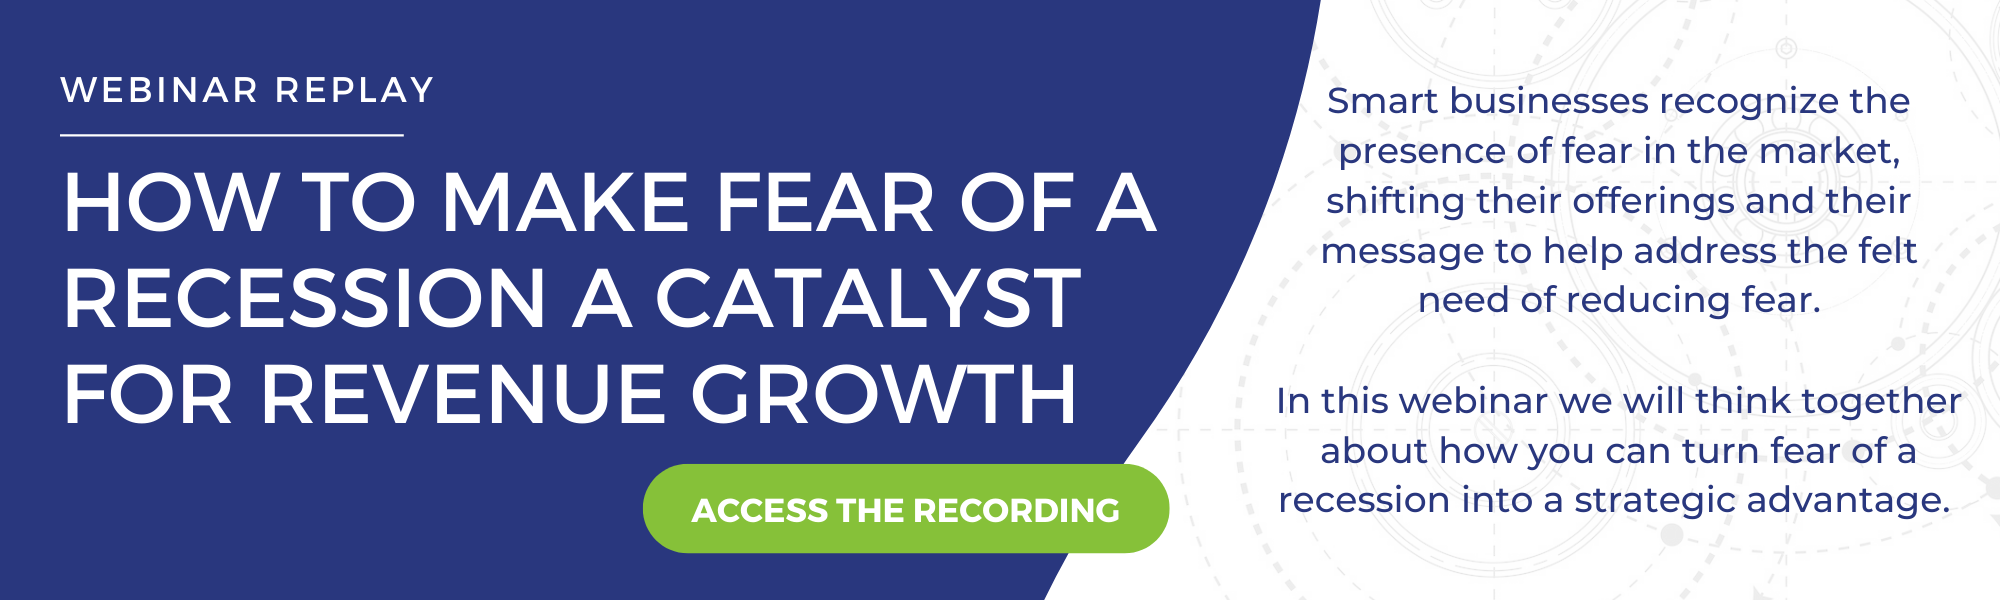 In this webinar we will think together about how you can turn fear of a recession into a strategic advantage. 